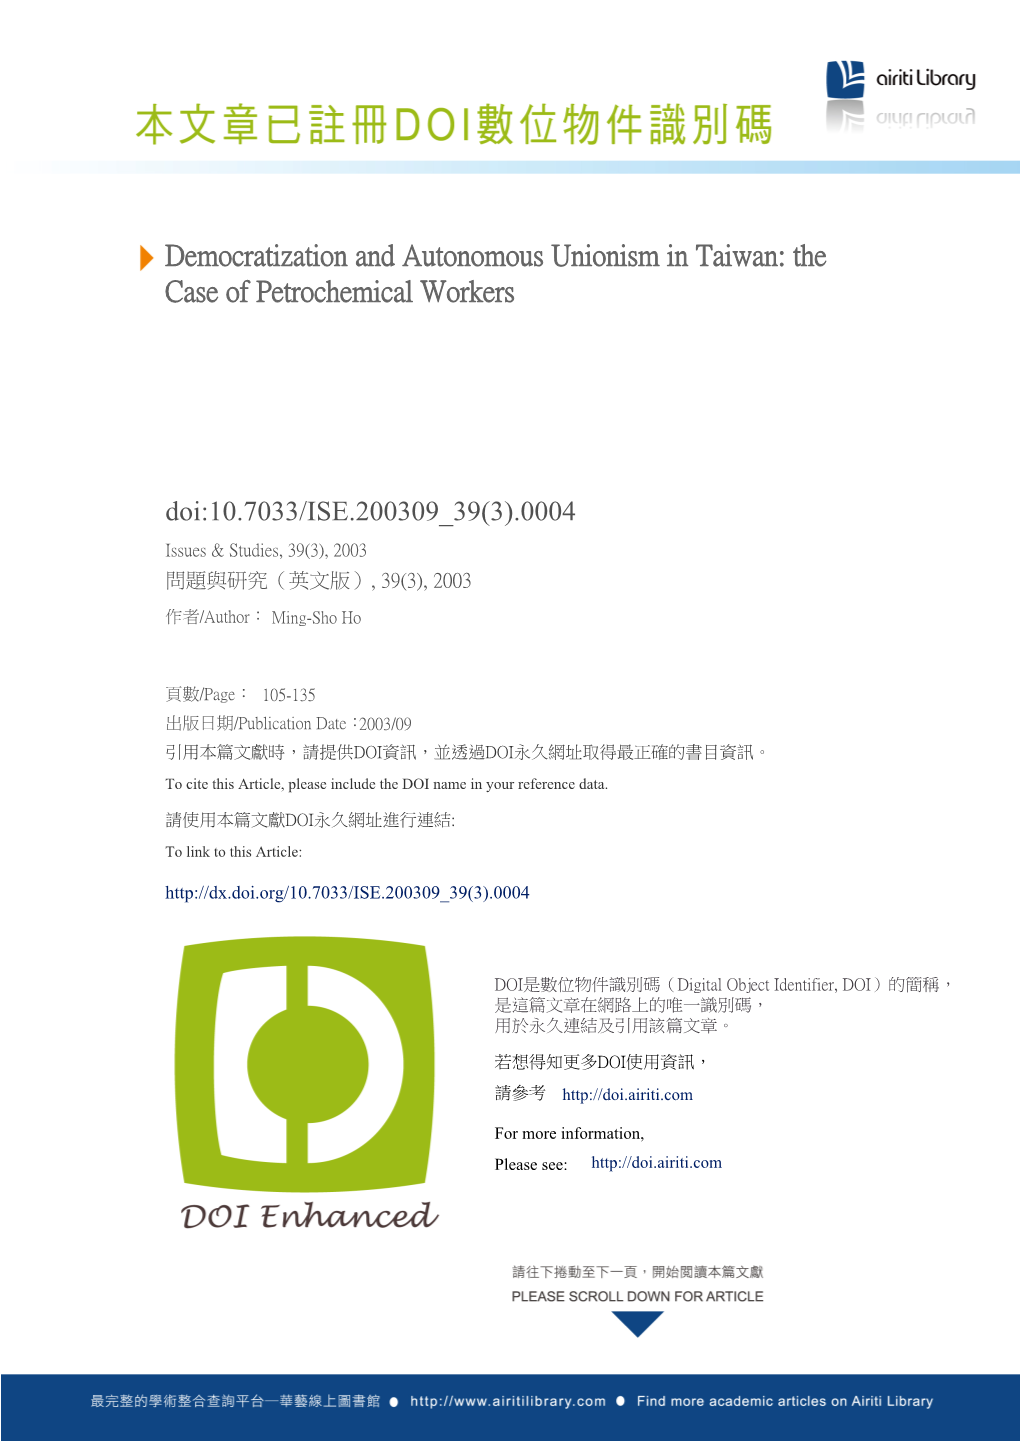 Democratization and Autonomous Unionism in Taiwan: the Case of Petrochemical Workers